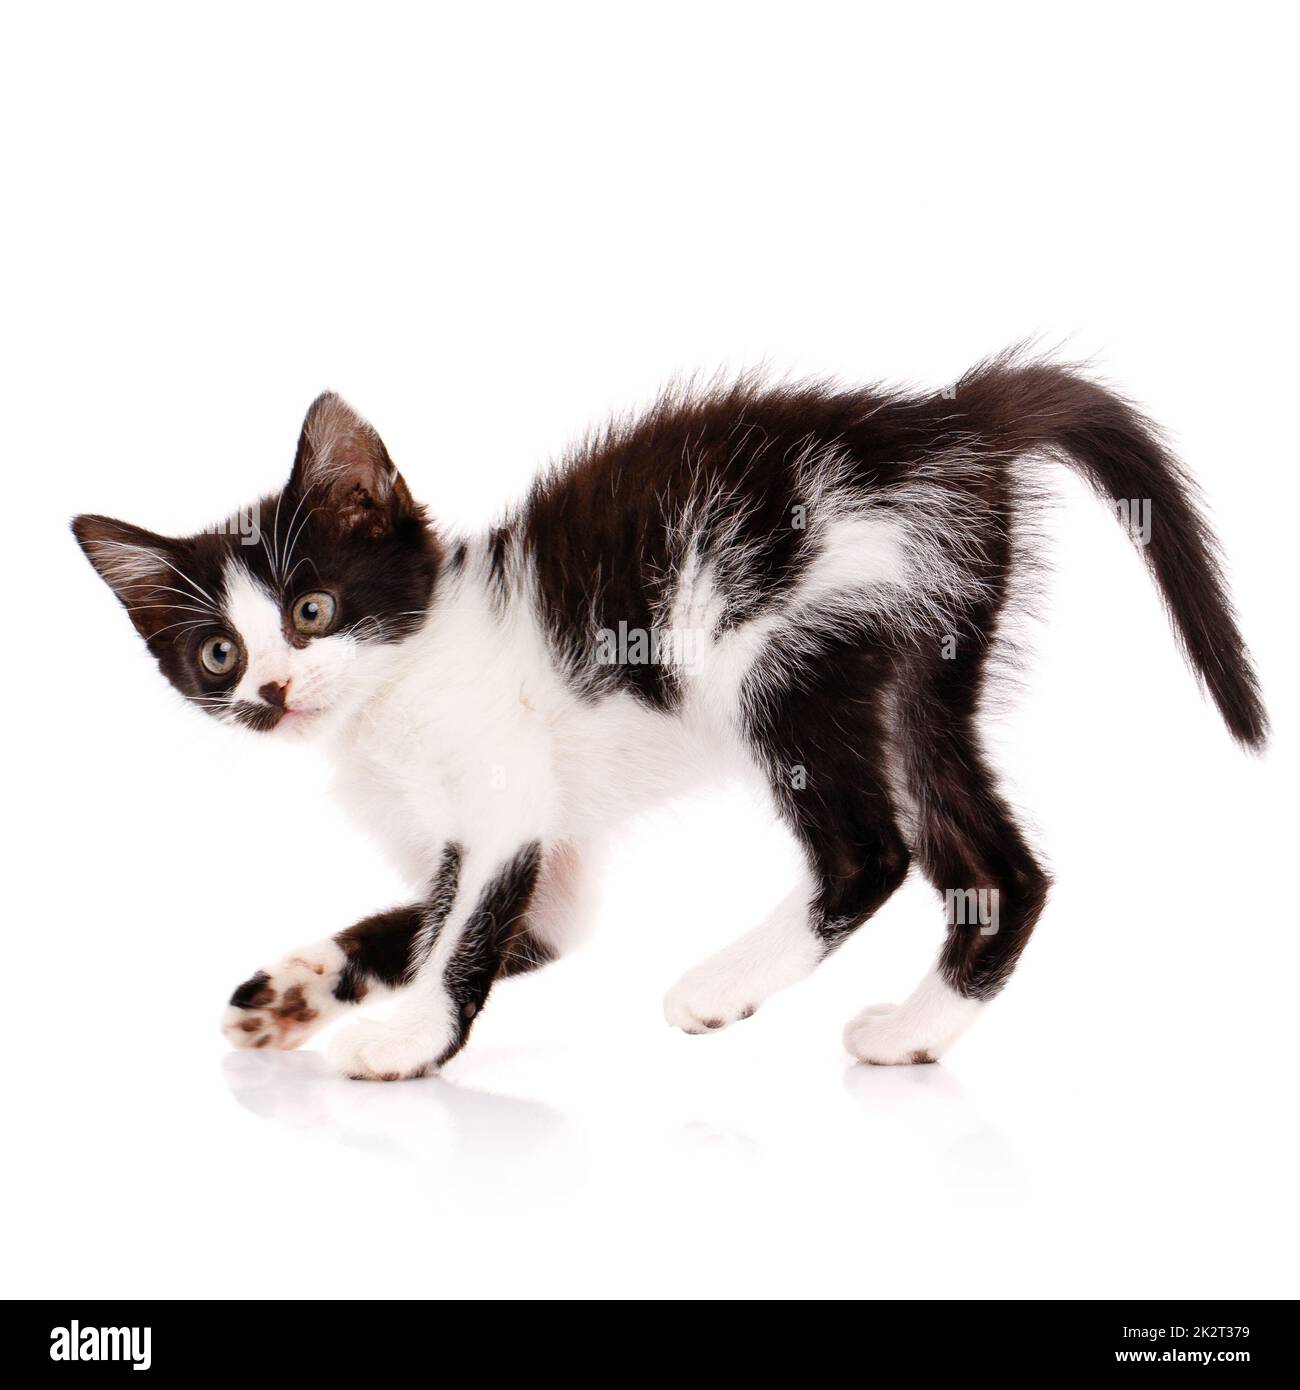 Playful little kitten with a crazy facial expression playing on a white background. Stock Photo